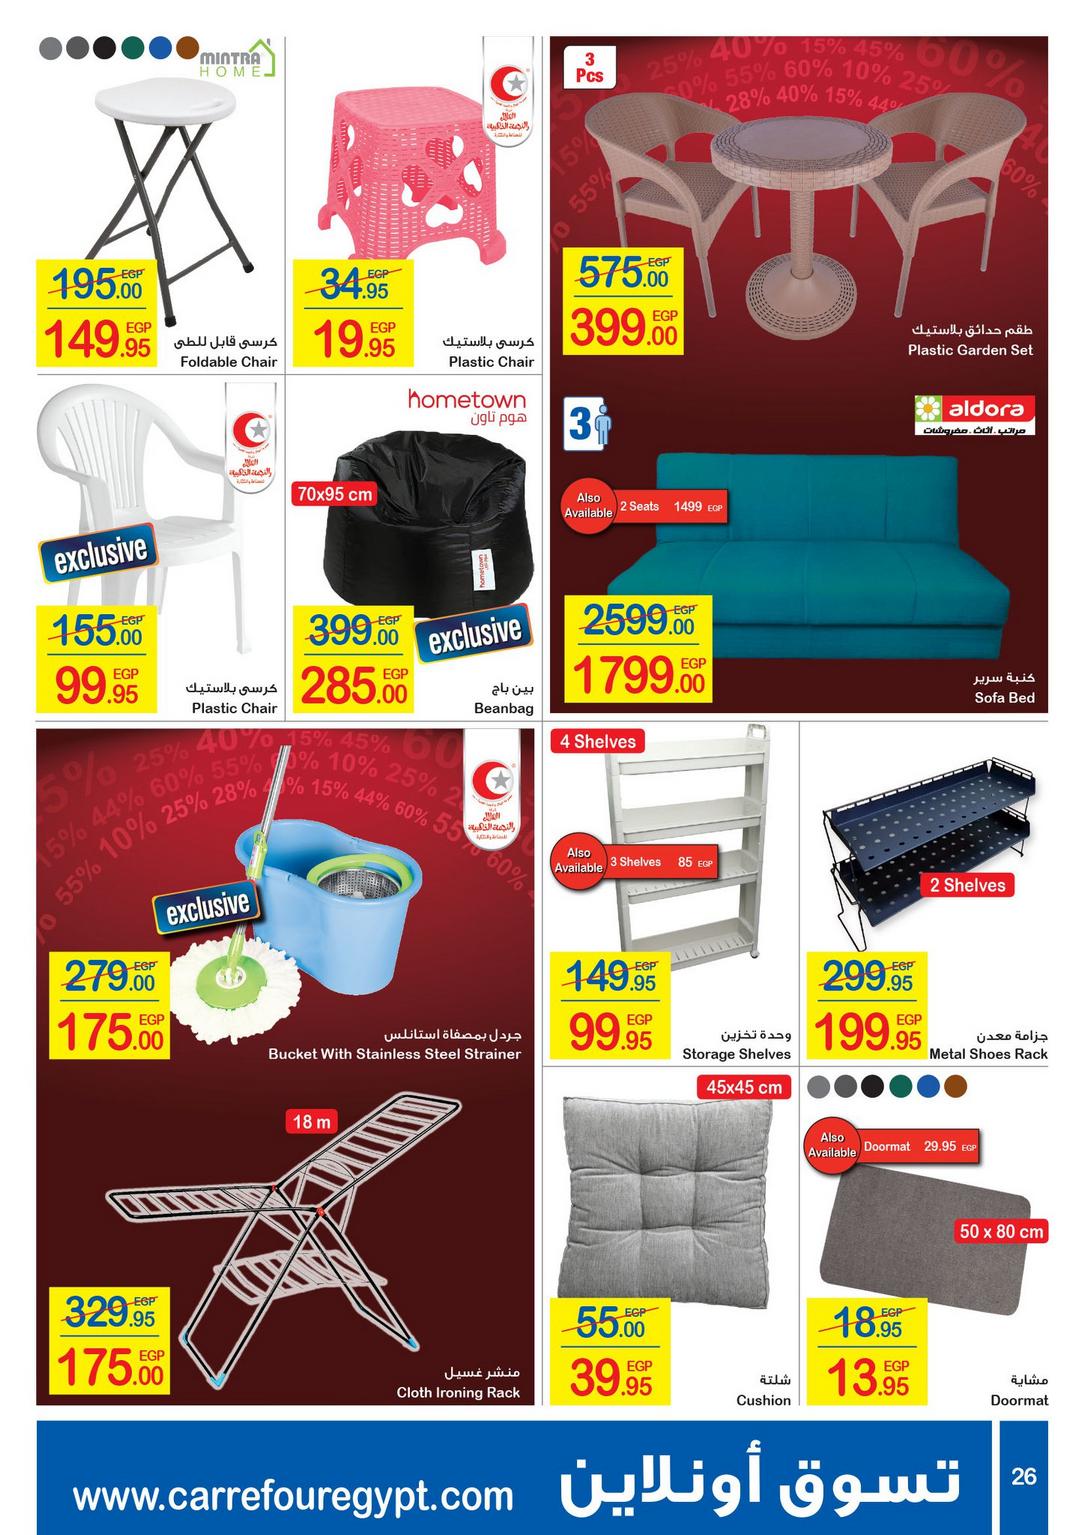 Carrefour Deals from 1/1 till 14/1 | Carrefour Egypt 27